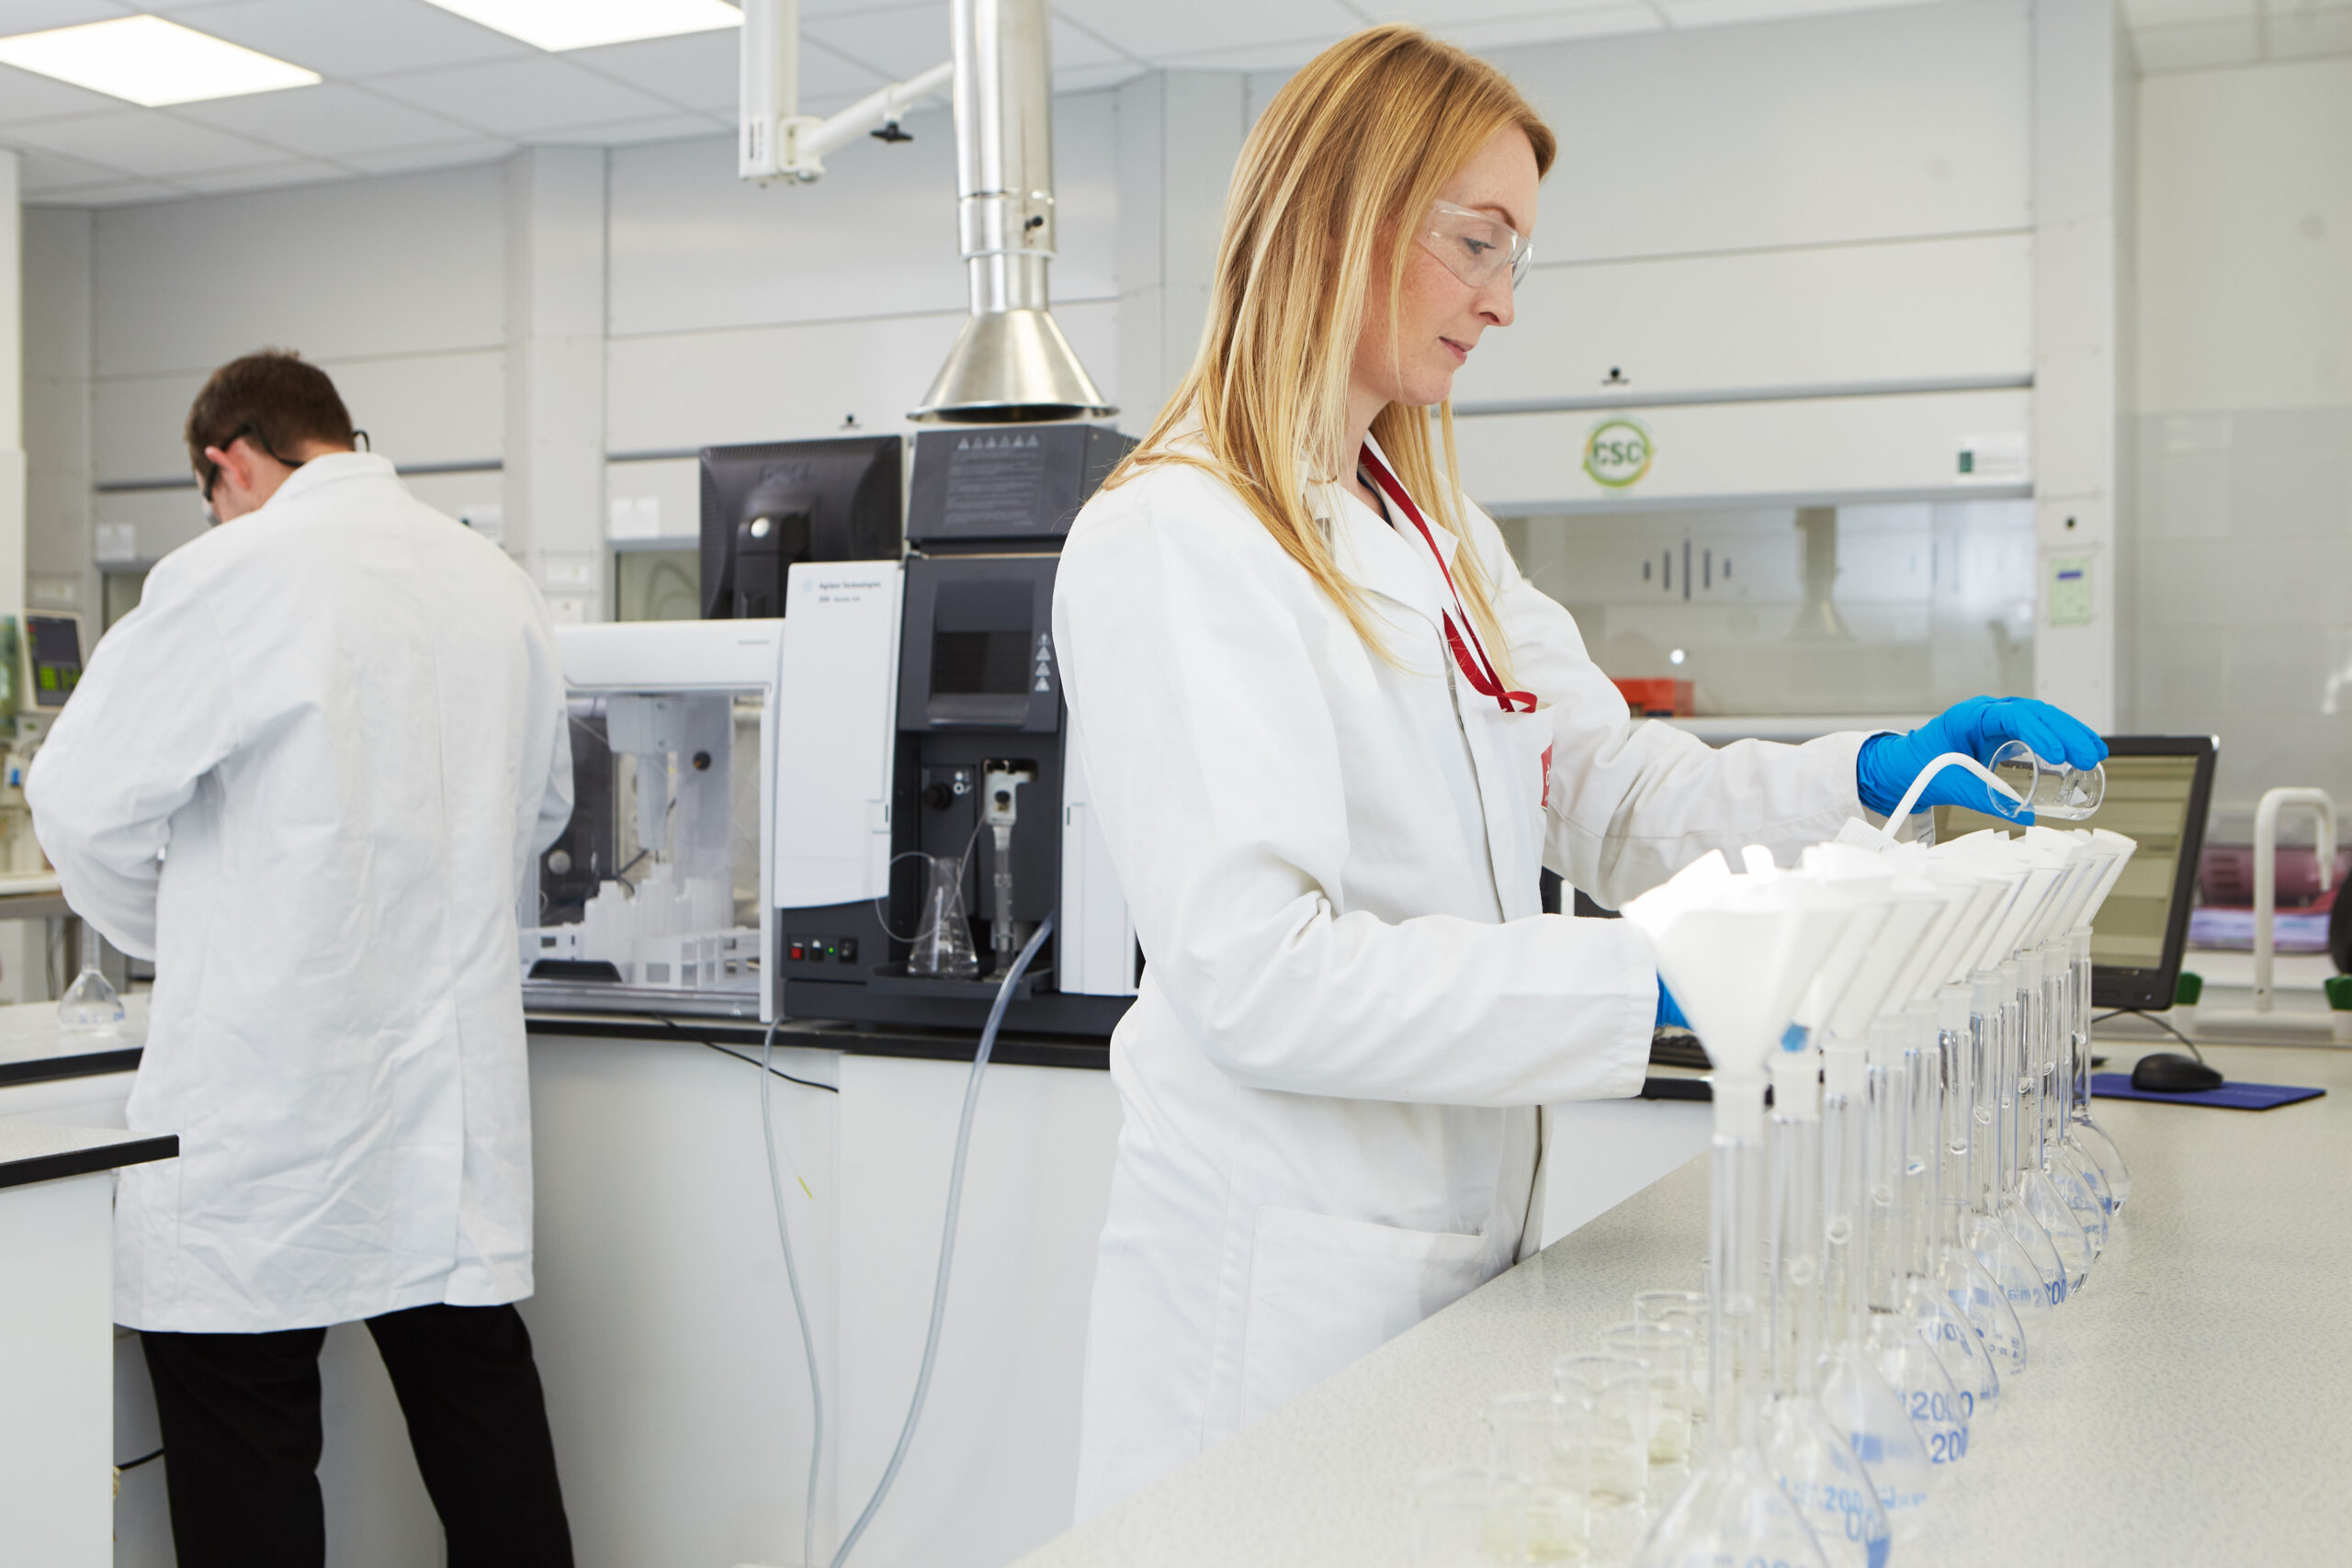 Dairygold partners with BioPharmaChem Ireland and Munster Technological University to offer laboratory apprenticeships